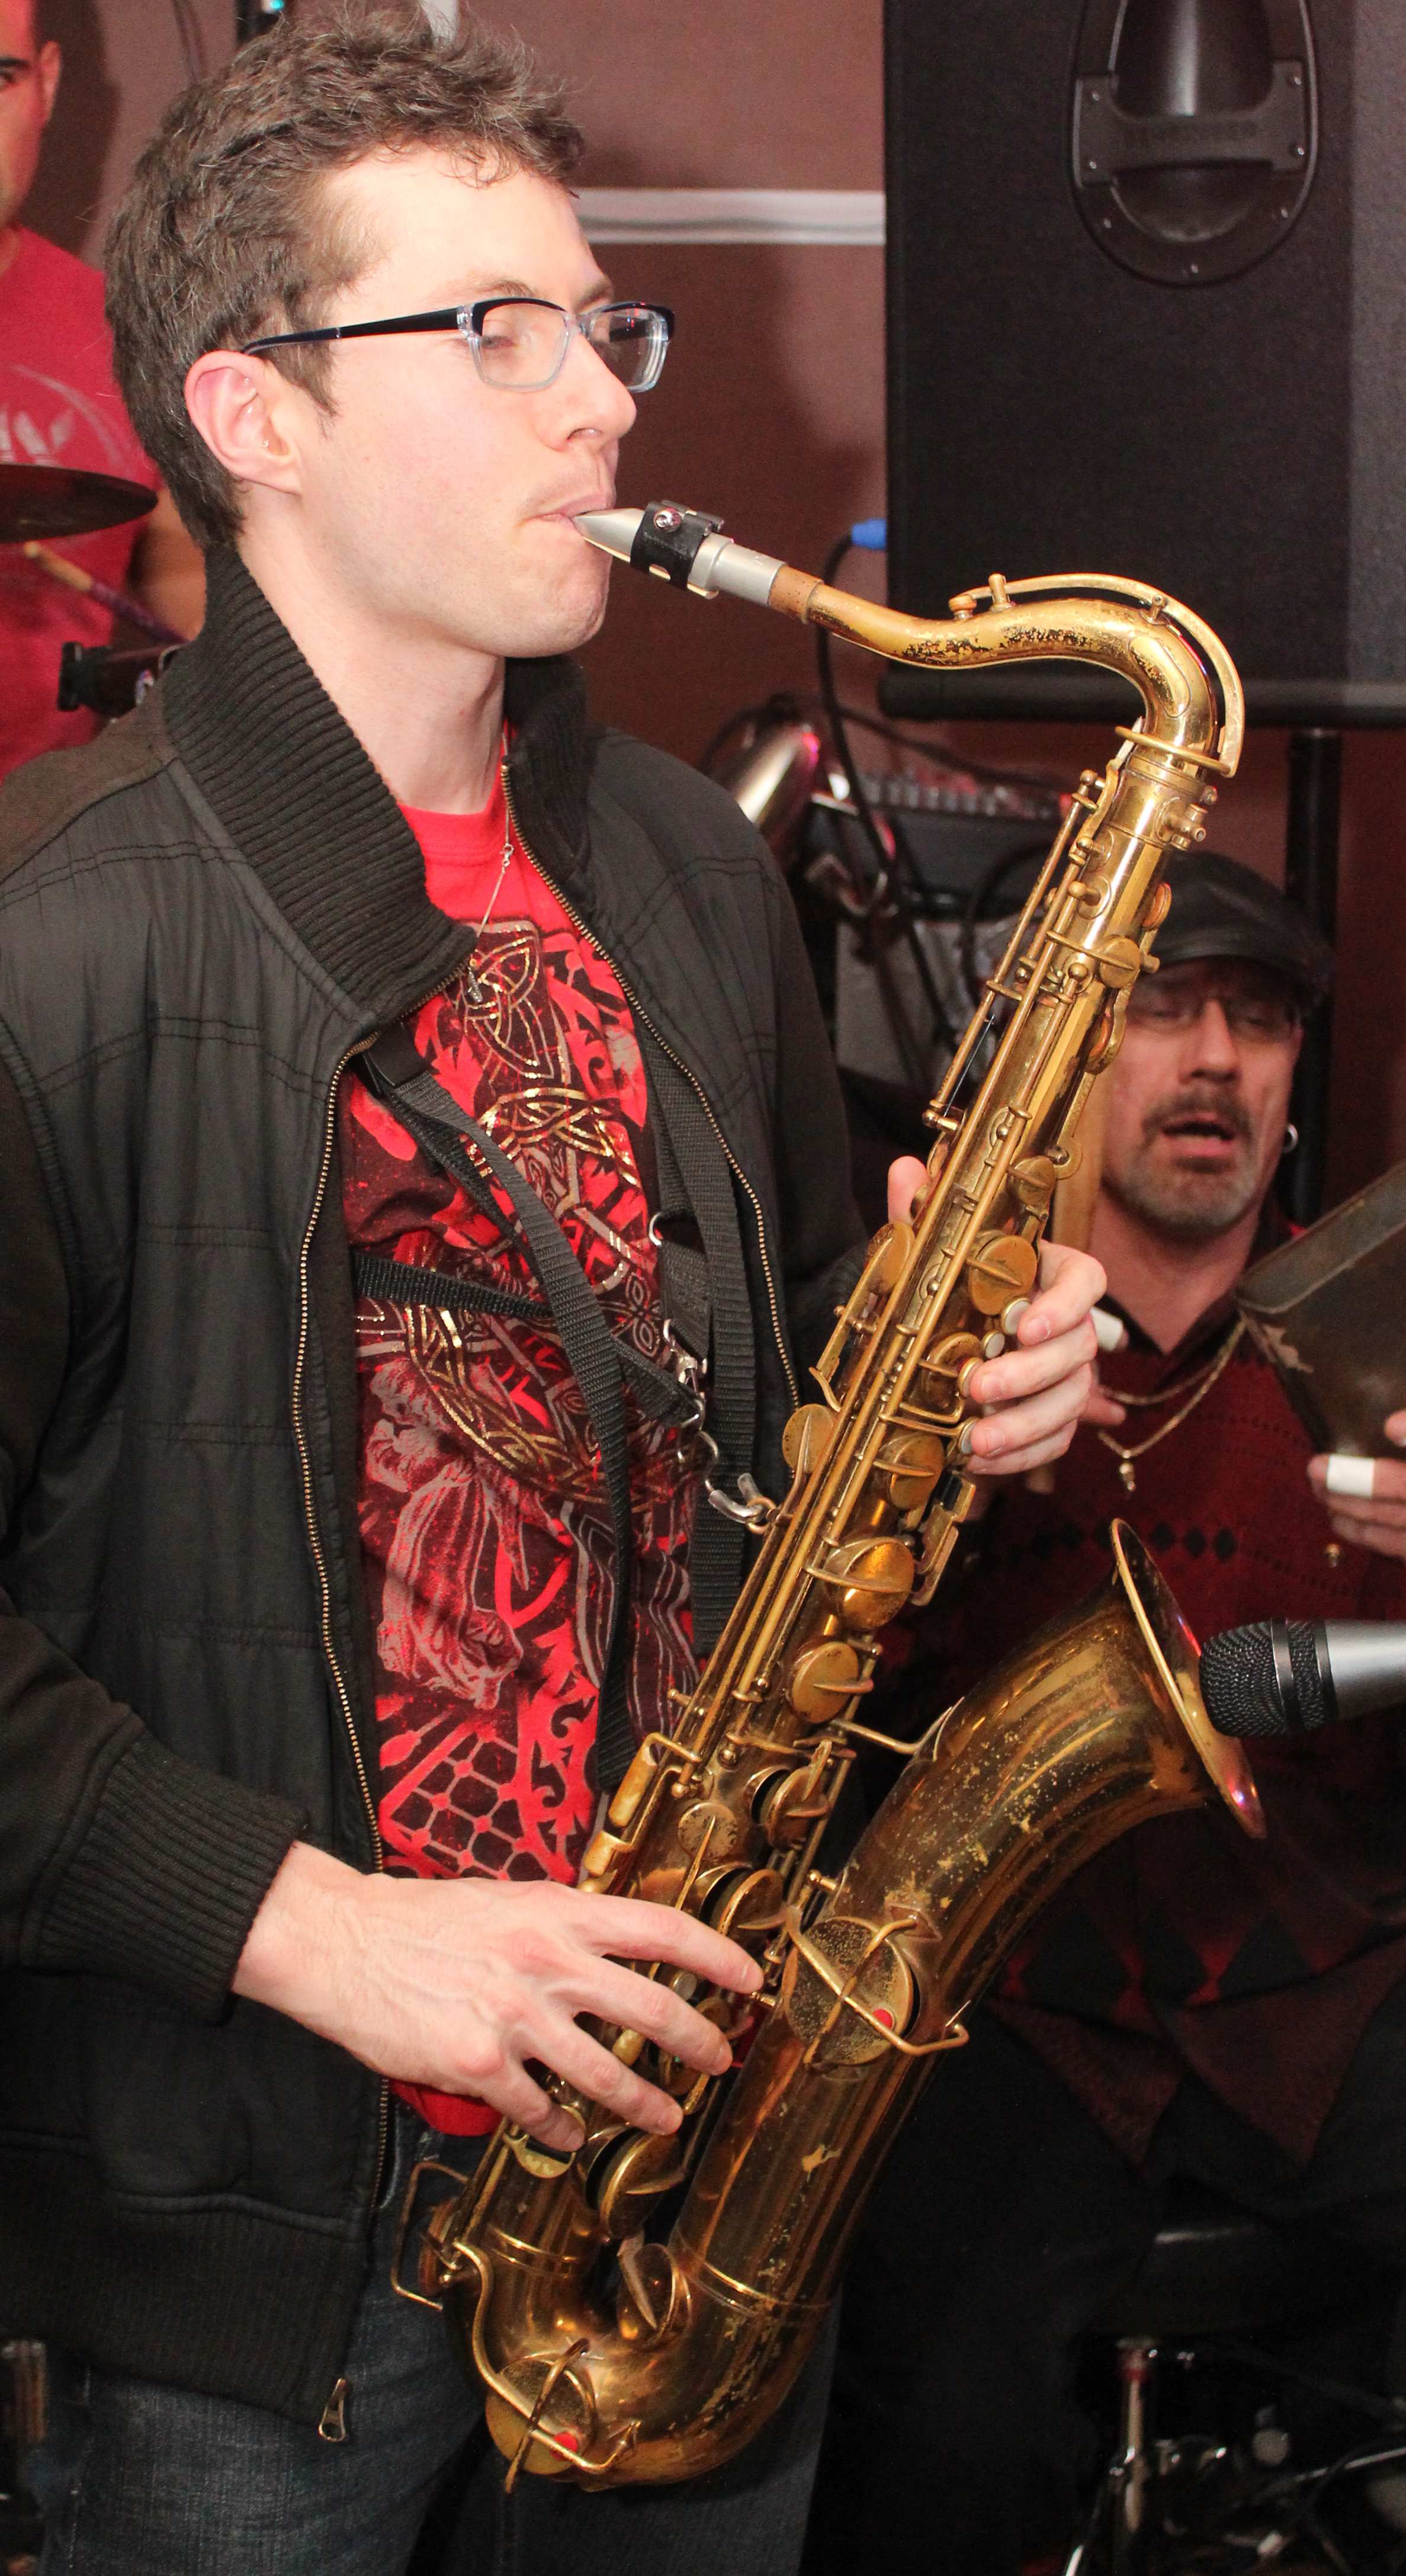 what-is-the-proper-way-to-safely-grip-the-tenor-sax-when-playing-c